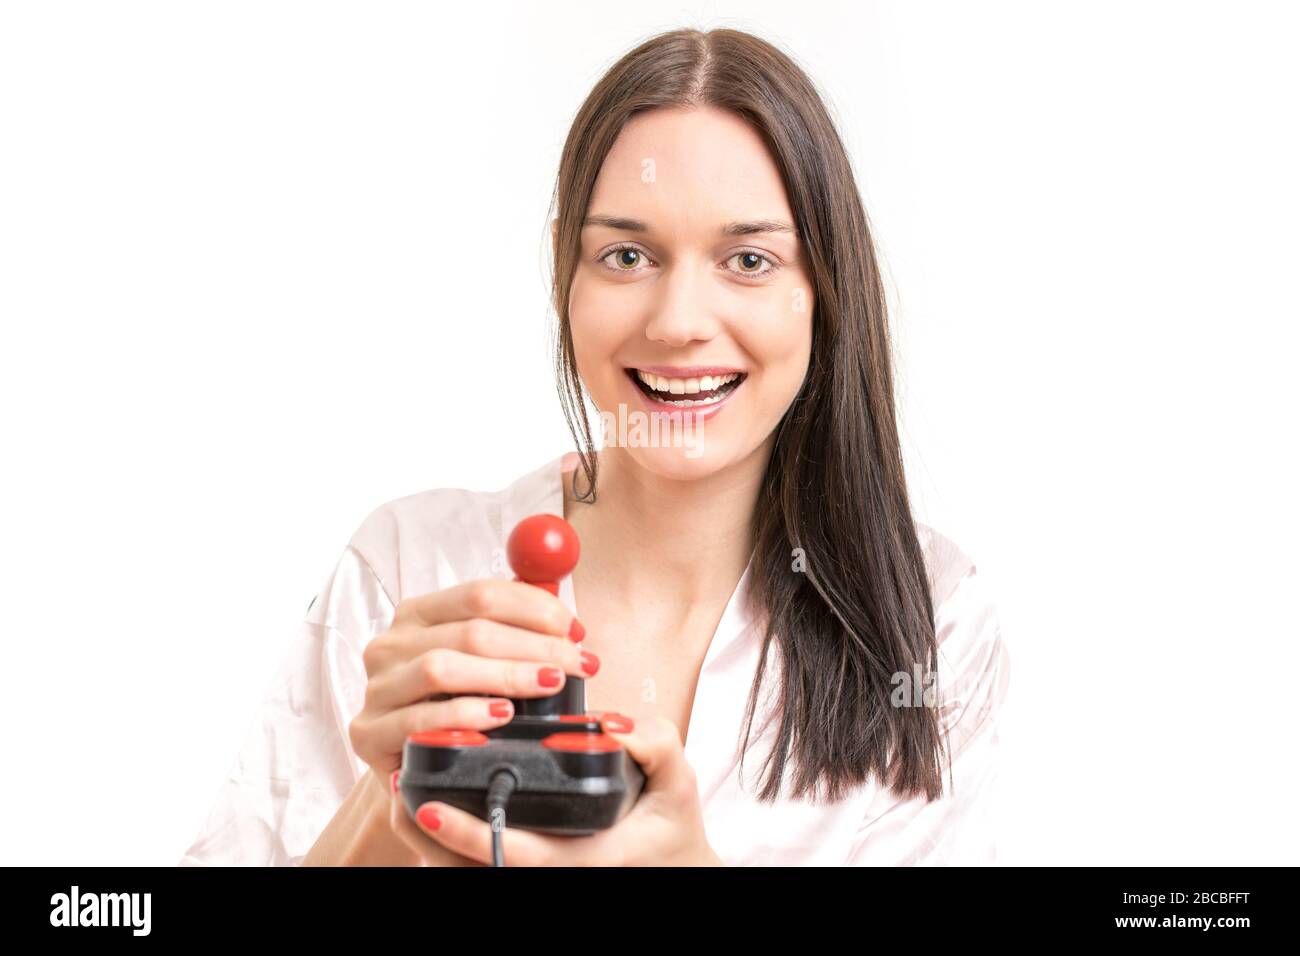 Attractive young brunette woman wearing a pink nightgown, laughing while operating a joystick. Royalty free stock photo. Stock Photo